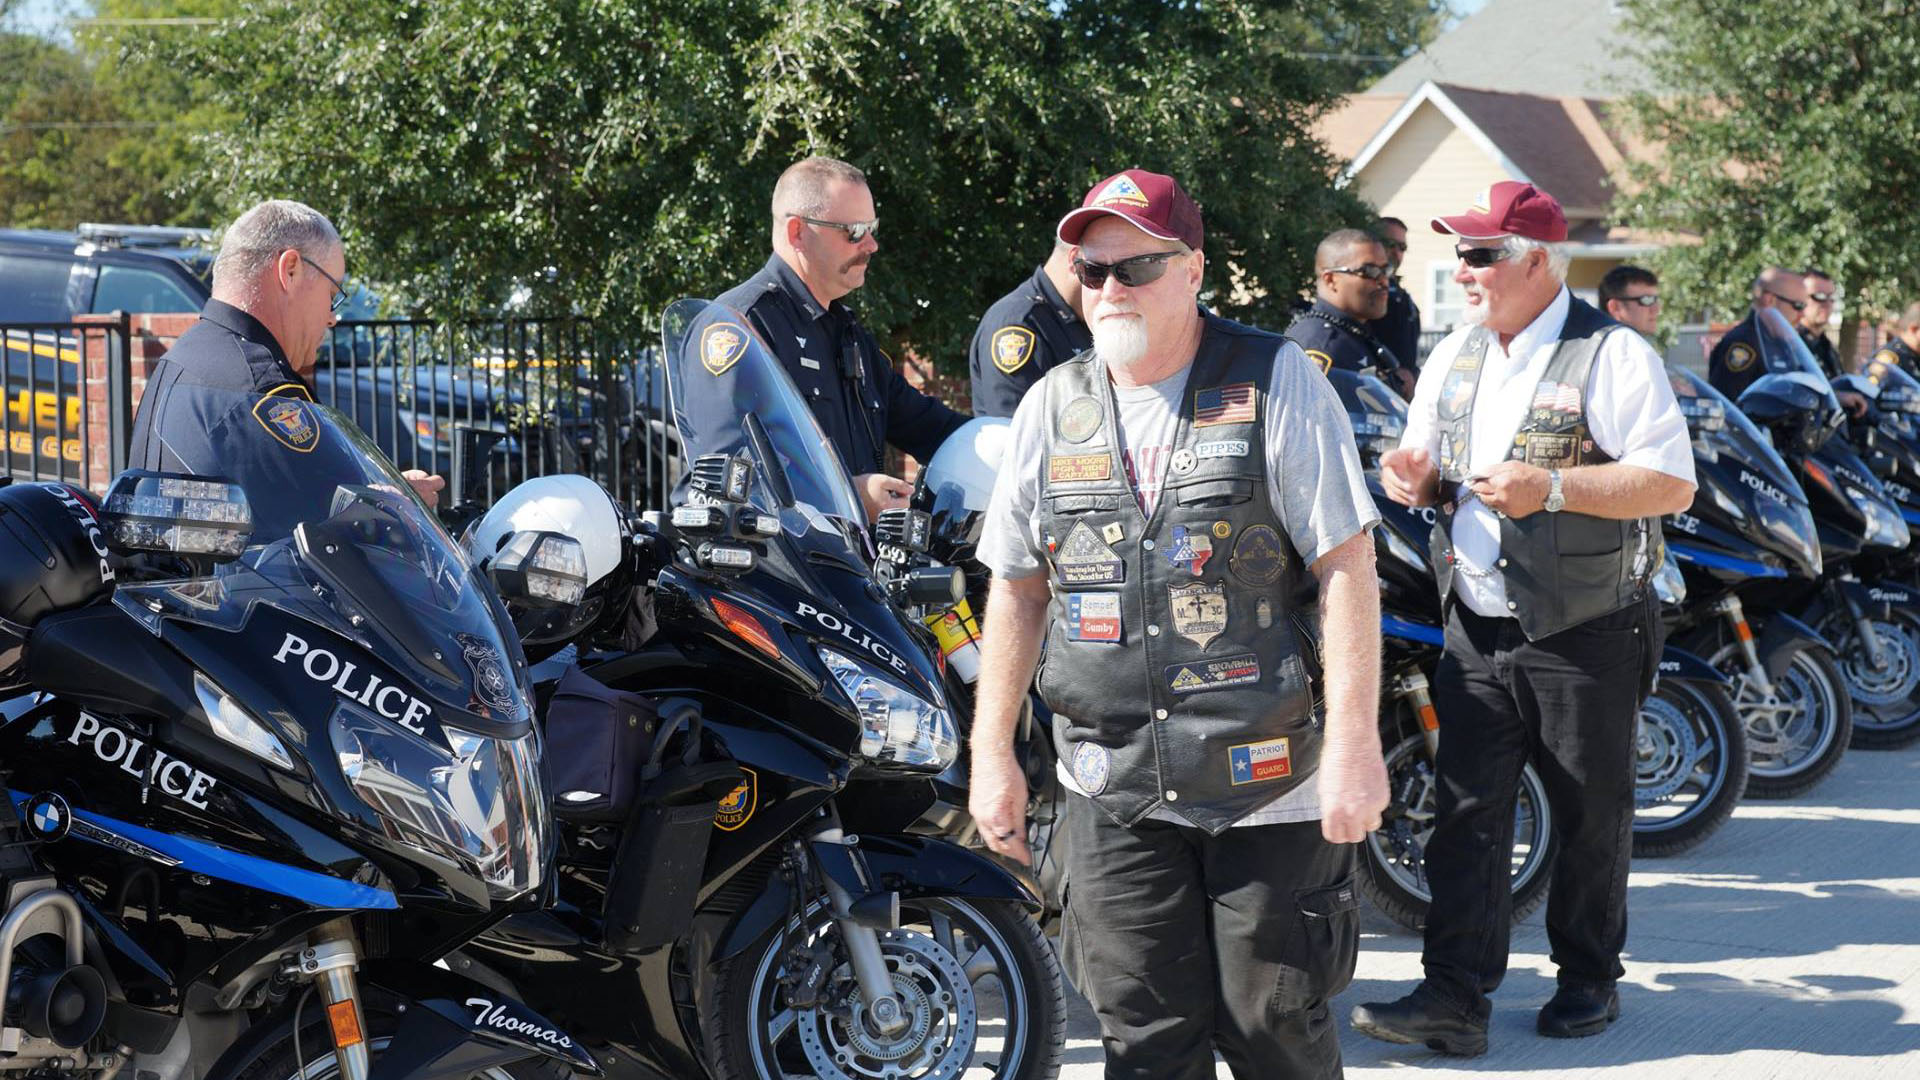 Featured image for “Fathom Agent Rides to Honor Those Who Served”